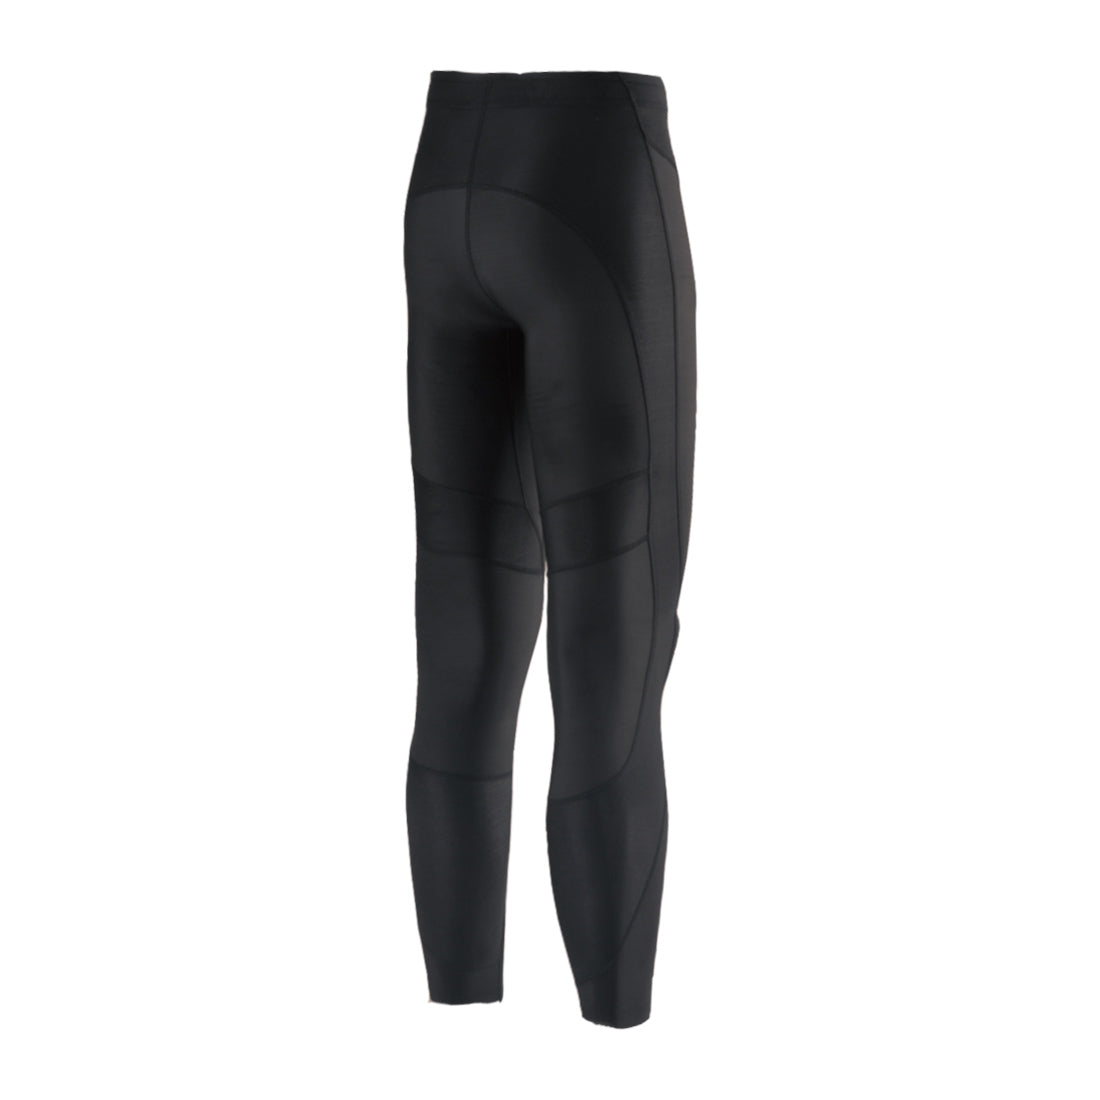 JS1771 Compression Power Tights メンズAll Season Spring-Summer